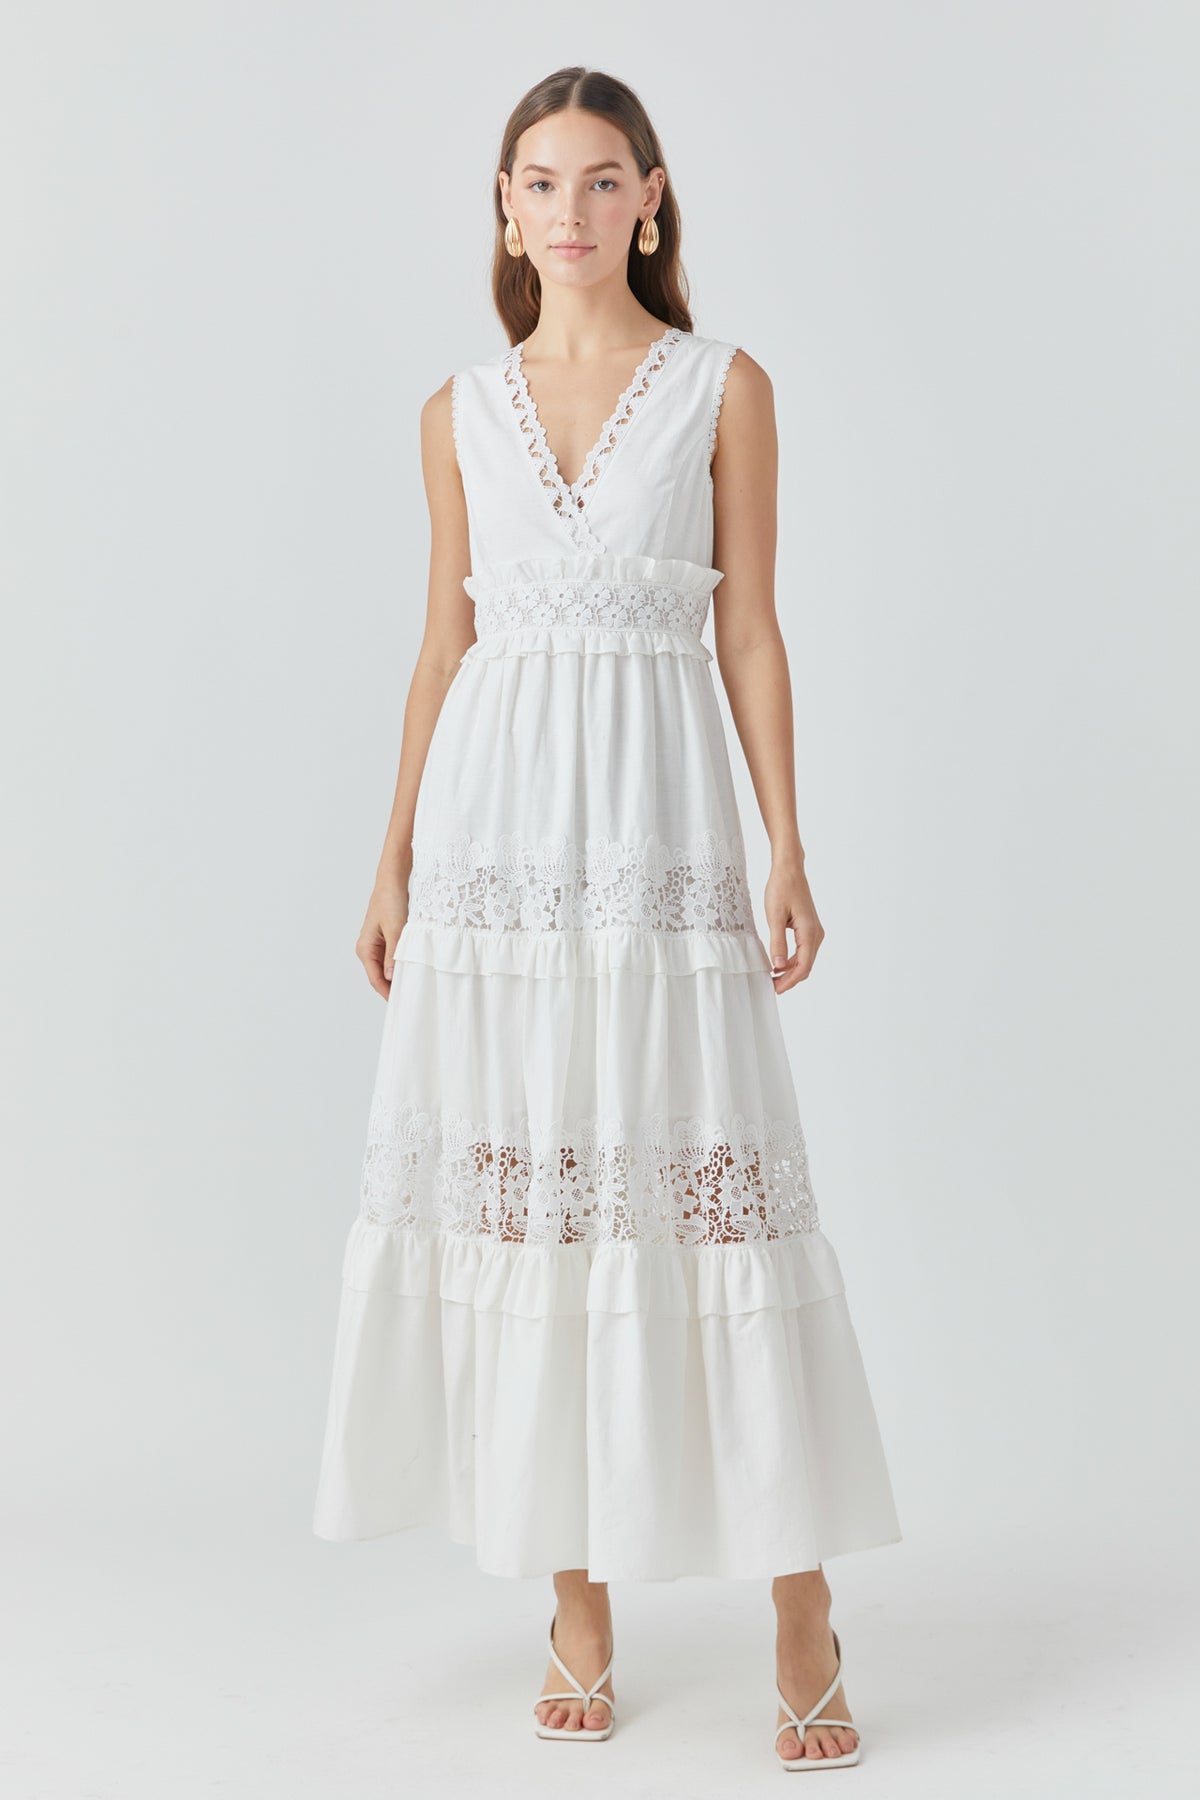 ENDLESS ROSE - Sleeveless Lace Mixed Long Dress - DRESSES available at Objectrare